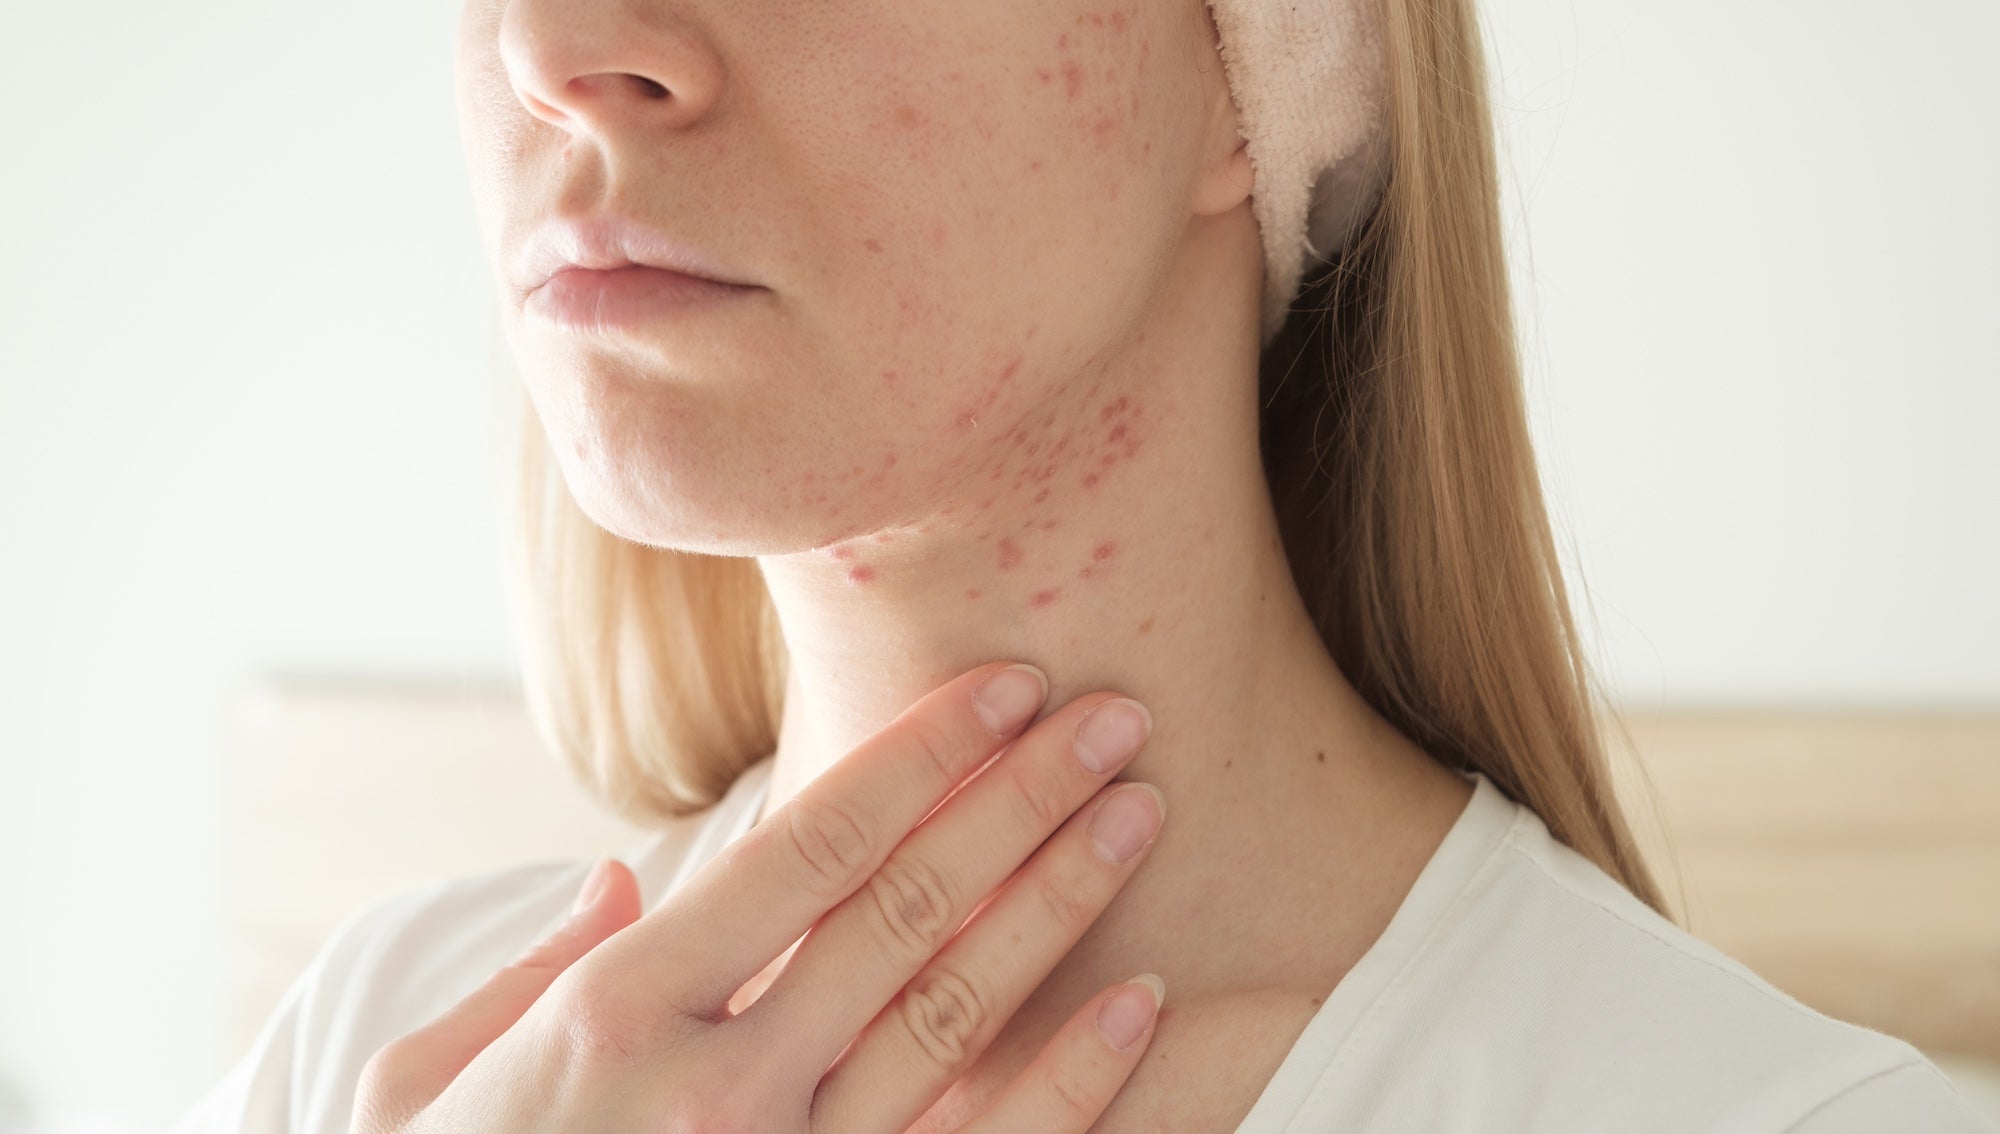 Do acne patches work on cystic acne?